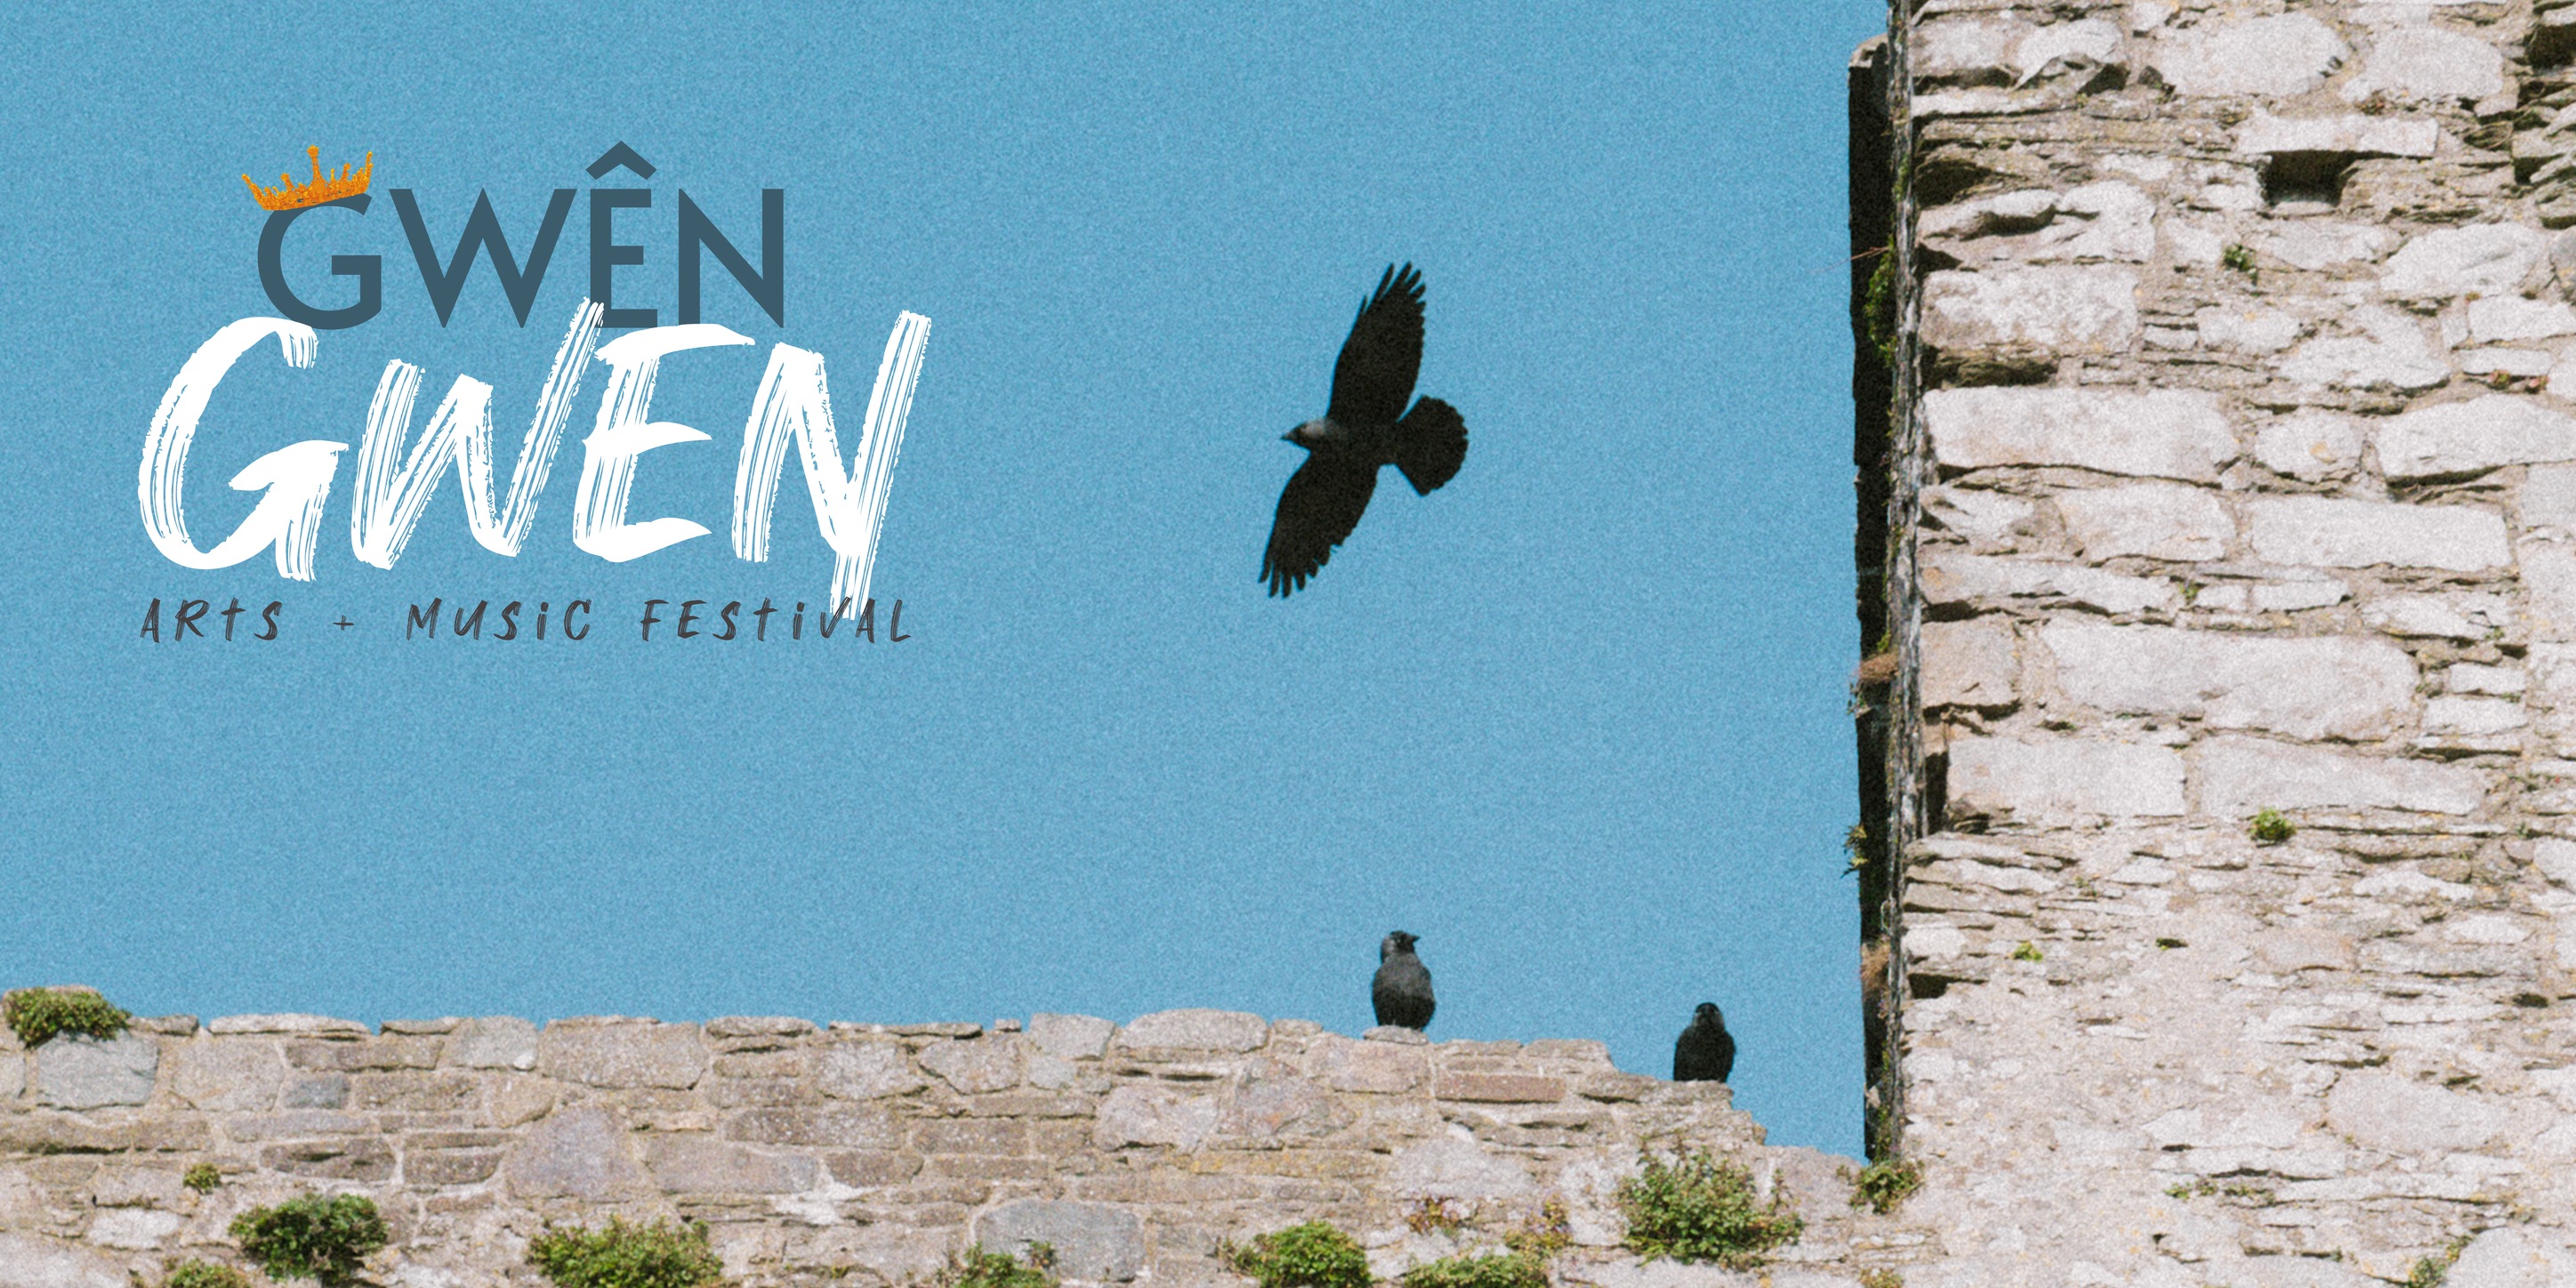 Gwen Gwen 2022 - Arts & Music Festival located in Kidwelly - image shows corvids above castle wall